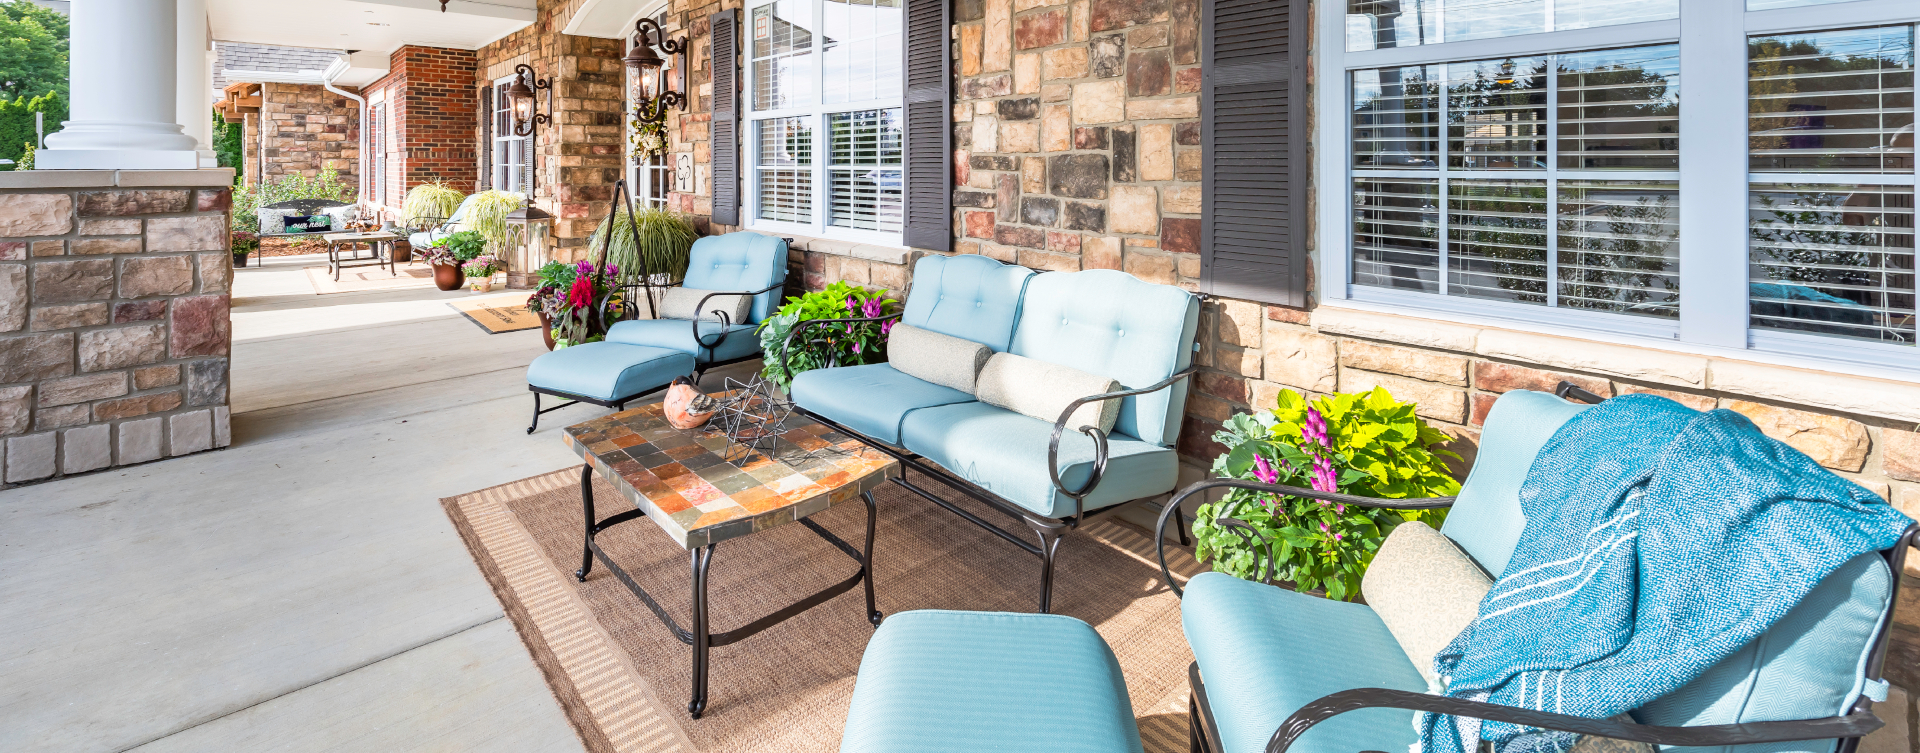 Sip on your favorite drink on the porch at Bickford of Shelby Township